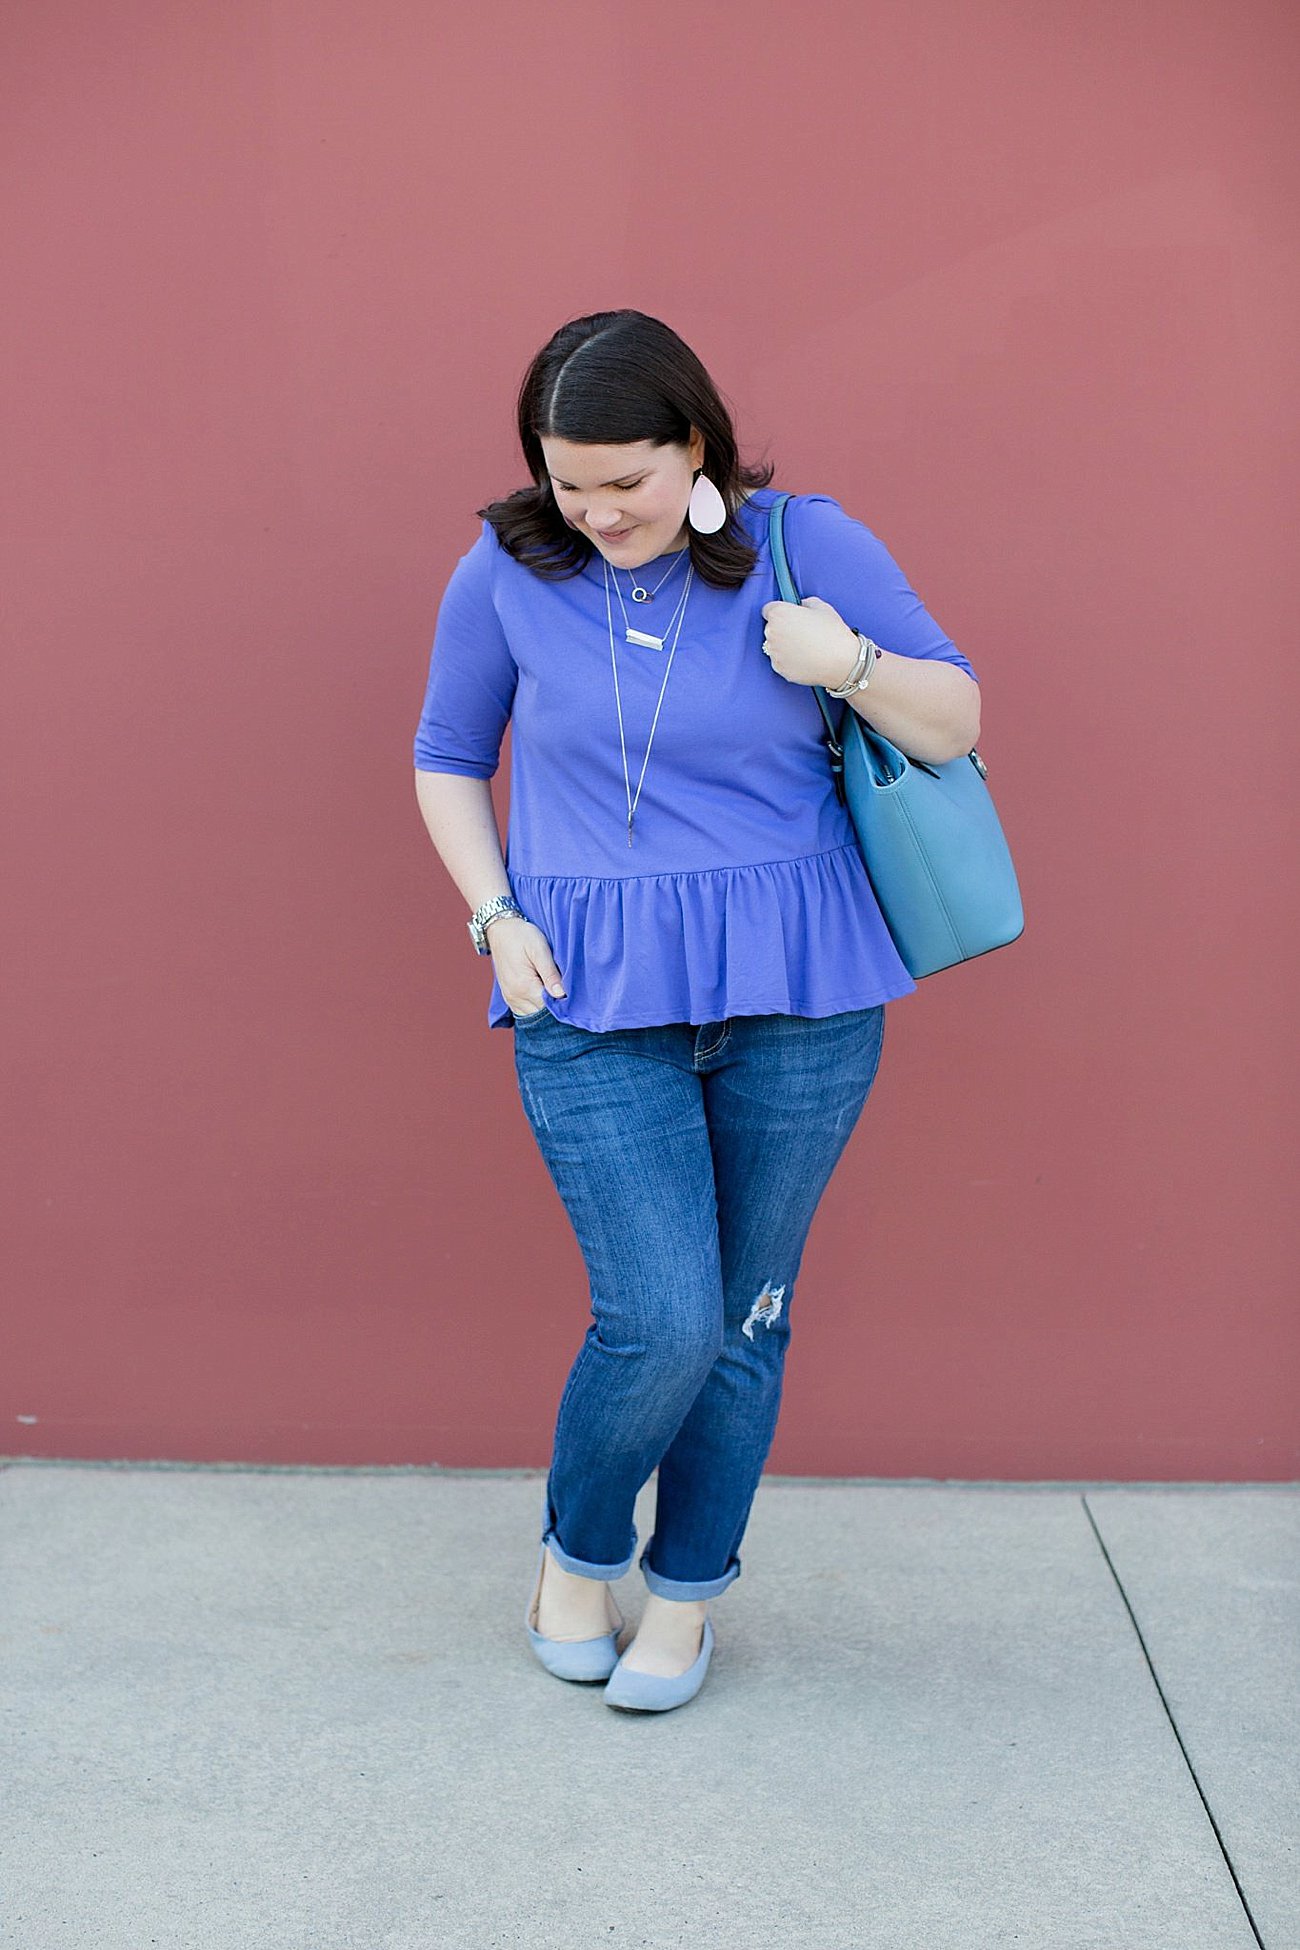 Elegantees Rebecca Top, The Flourish Market, Kut from the Kloth Kate Distressed Boyfriend Jean, The Root Collective Gaby Ballet Flat, Nickel and Suede earrings, Michael Kors tote | Mom Style | North Carolina Fashion & Style Blogger (8) (2)